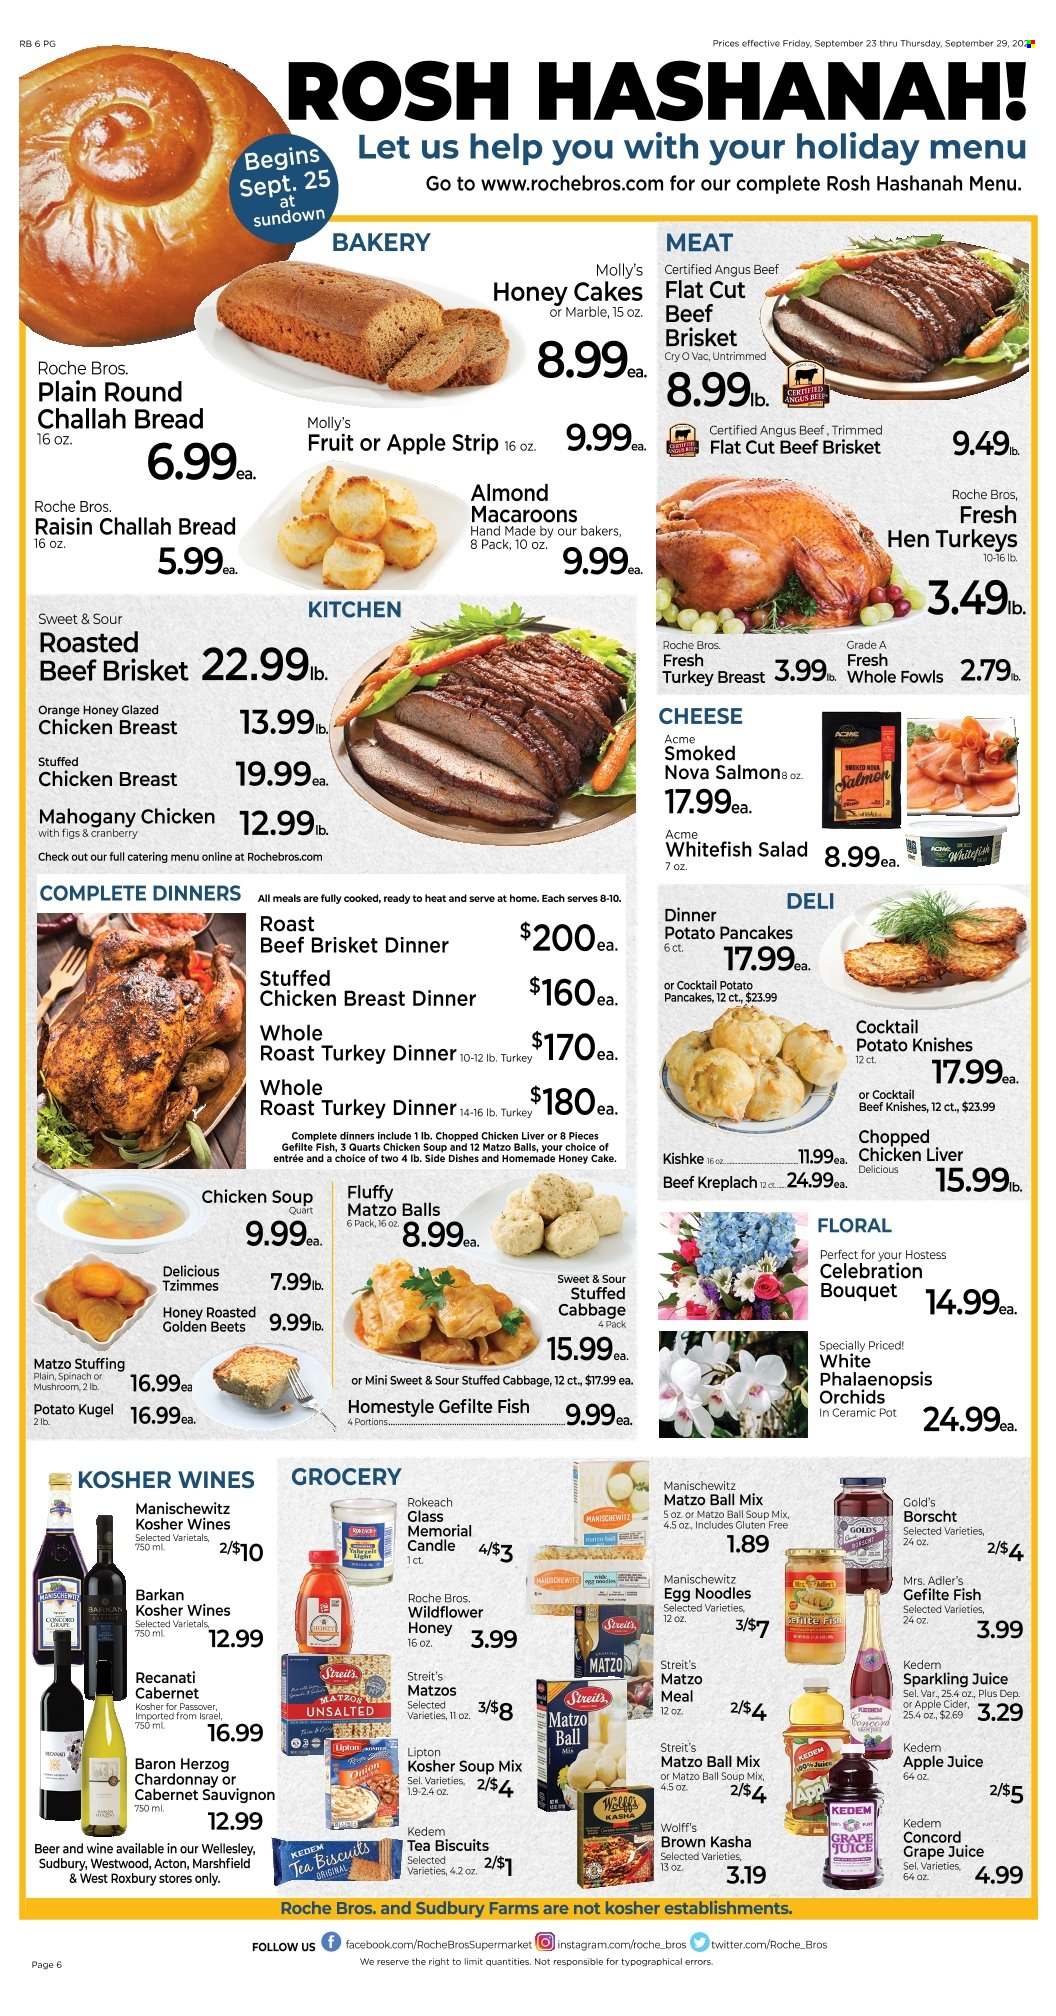 thumbnail - Roche Bros. Flyer - 09/23/2022 - 09/29/2022 - Sales products - bread, challah, oranges, salmon, whitefish, fish, chicken soup, soup mix, soup, pancakes, noodles, potato pancakes, stuffed chicken, cheese, Celebration, biscuit, matzo meal, egg noodles, apple juice, juice, Lipton, sparkling juice, Kedem, Cabernet Sauvignon, red wine, white wine, Chardonnay, apple cider, Ron Pelicano, cider, beer, turkey breast, beef meat, beef brisket, Bakers, pot, bouquet. Page 6.